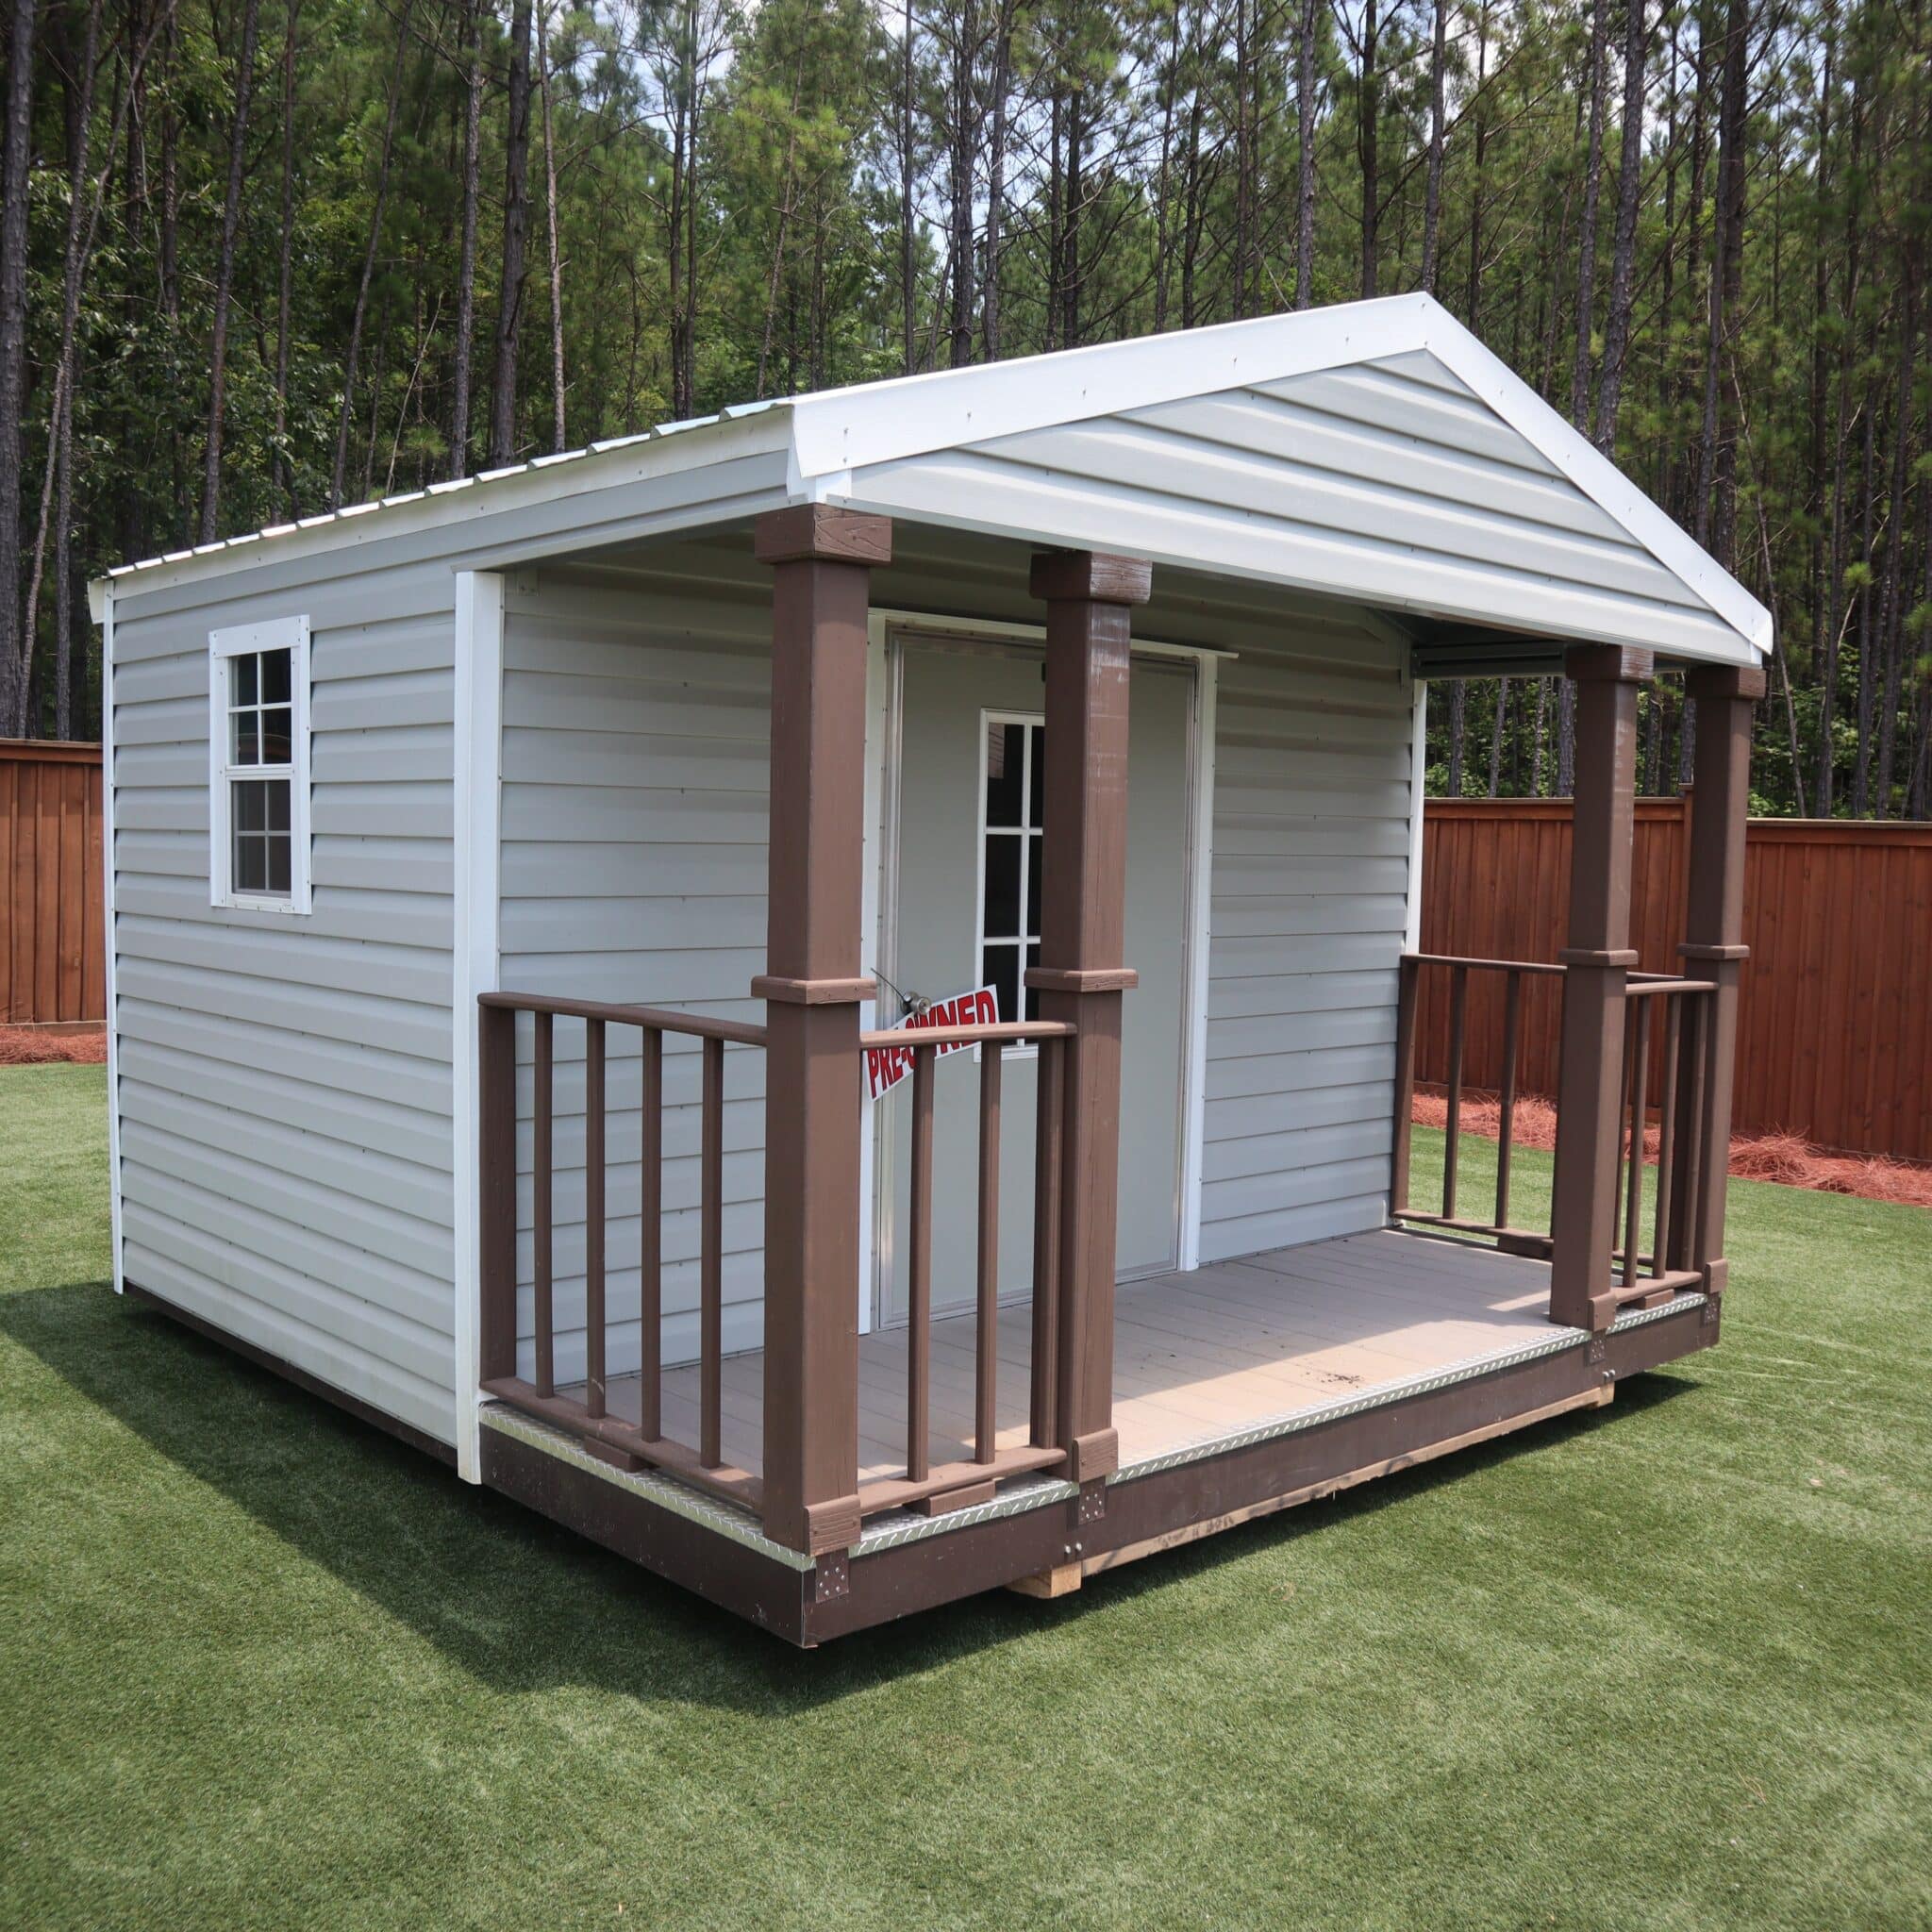 OutdoorOptions Eatonton Georgia 31024 Shed Picture Replace 15 Storage For Your Life Outdoor Options